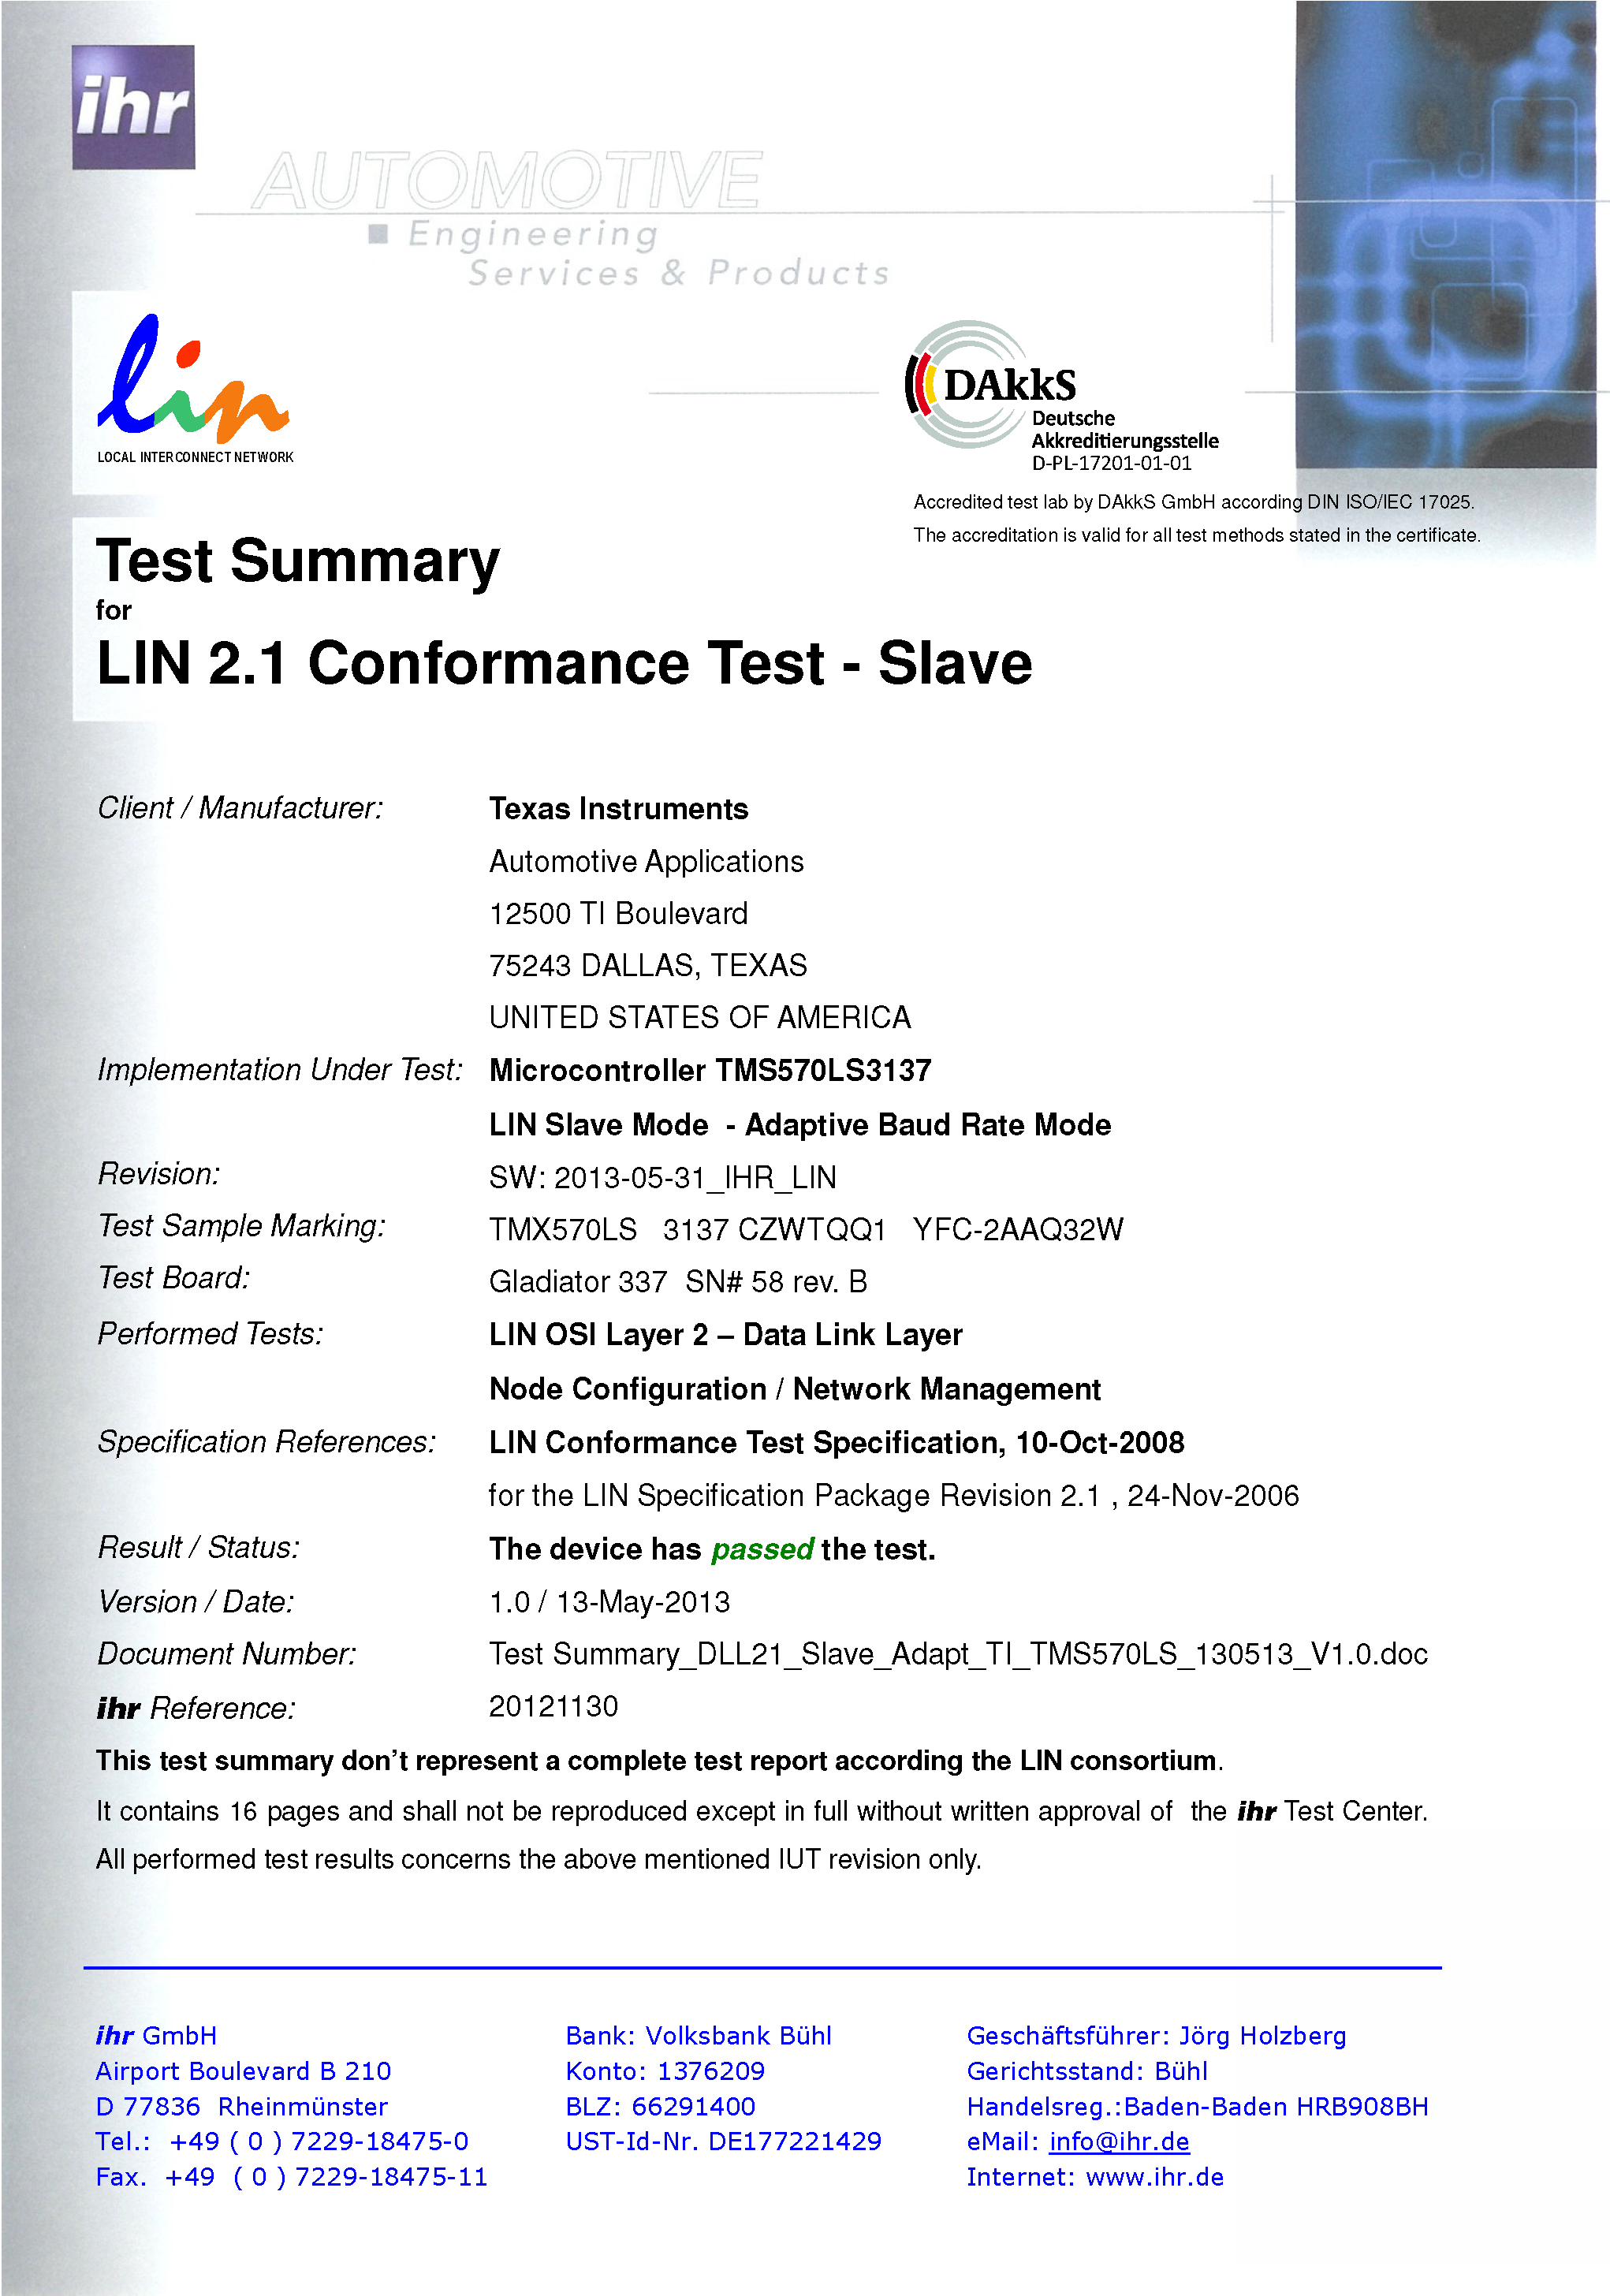 RM57L843 new_LIN_Certification_Slave_Adapt.png